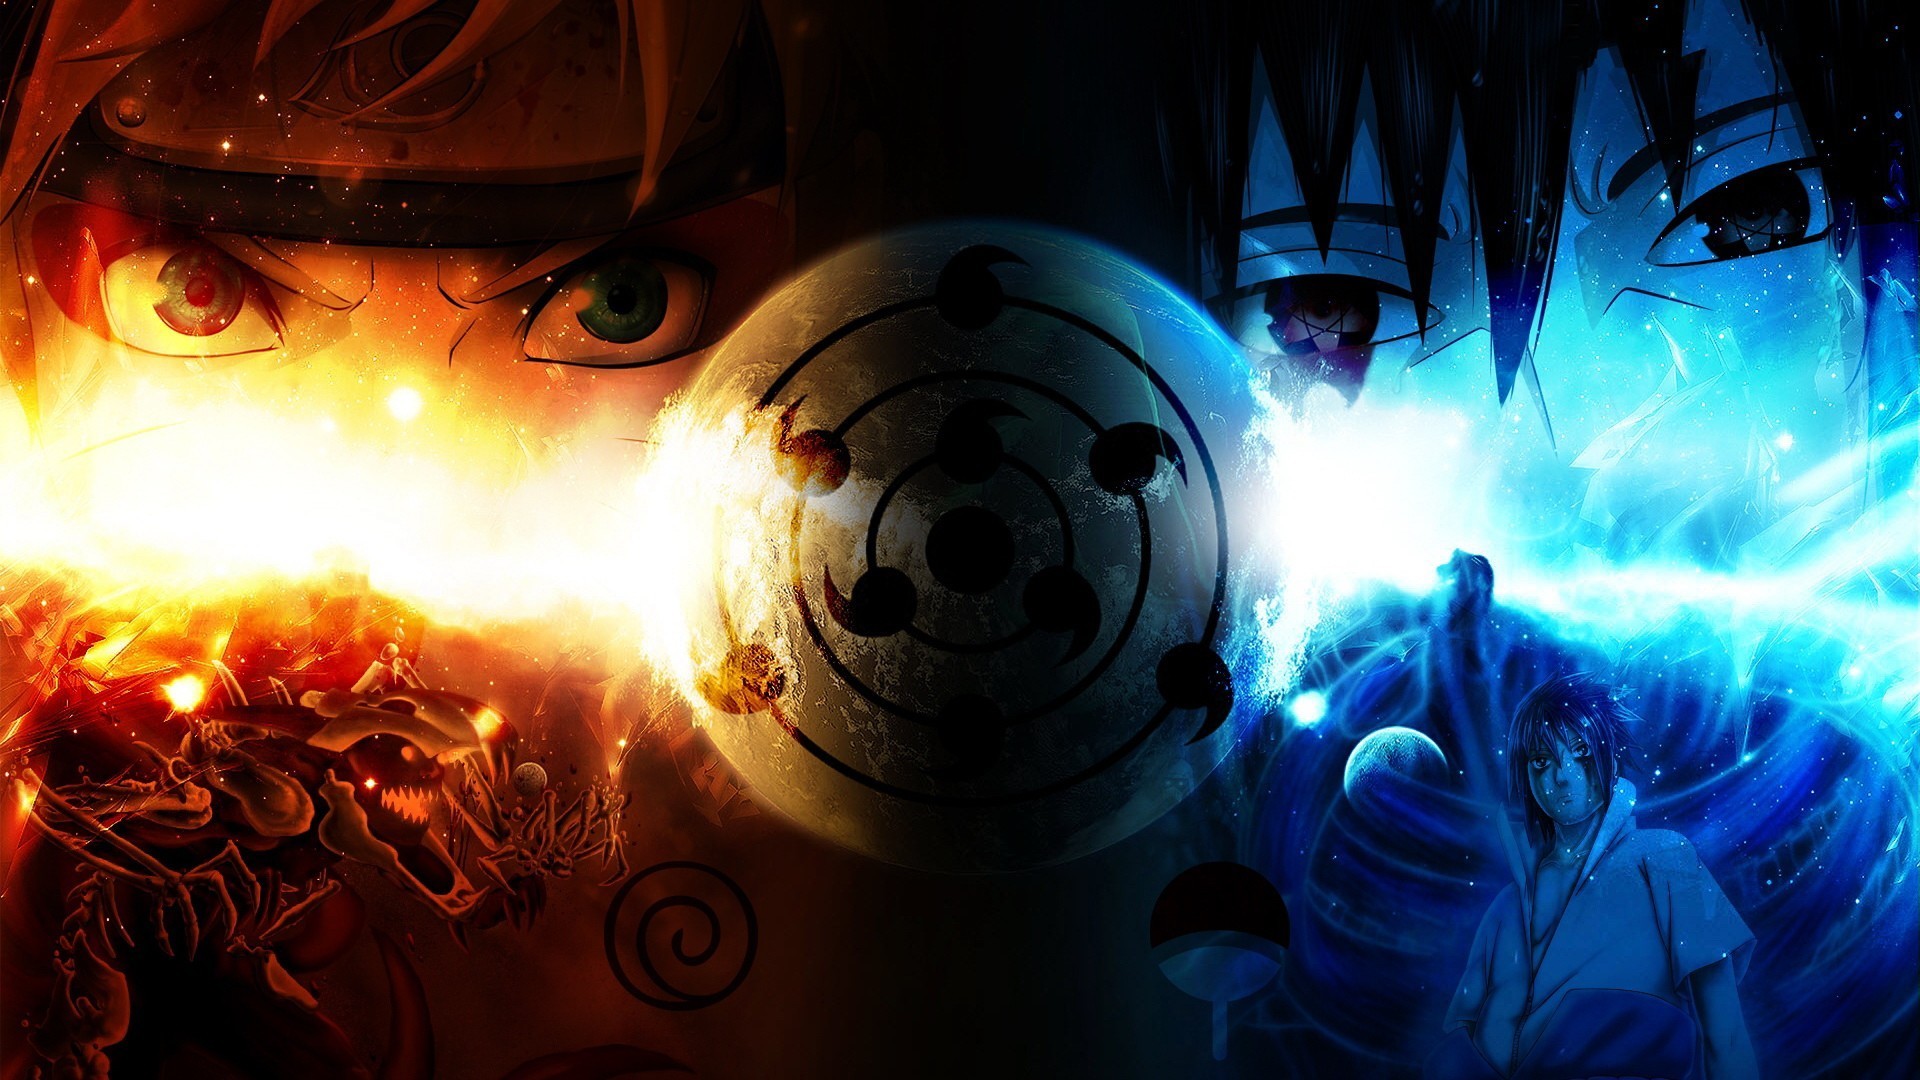 Naruto wallpaper ·① Download free awesome backgrounds for desktop computers and smartphones in ...